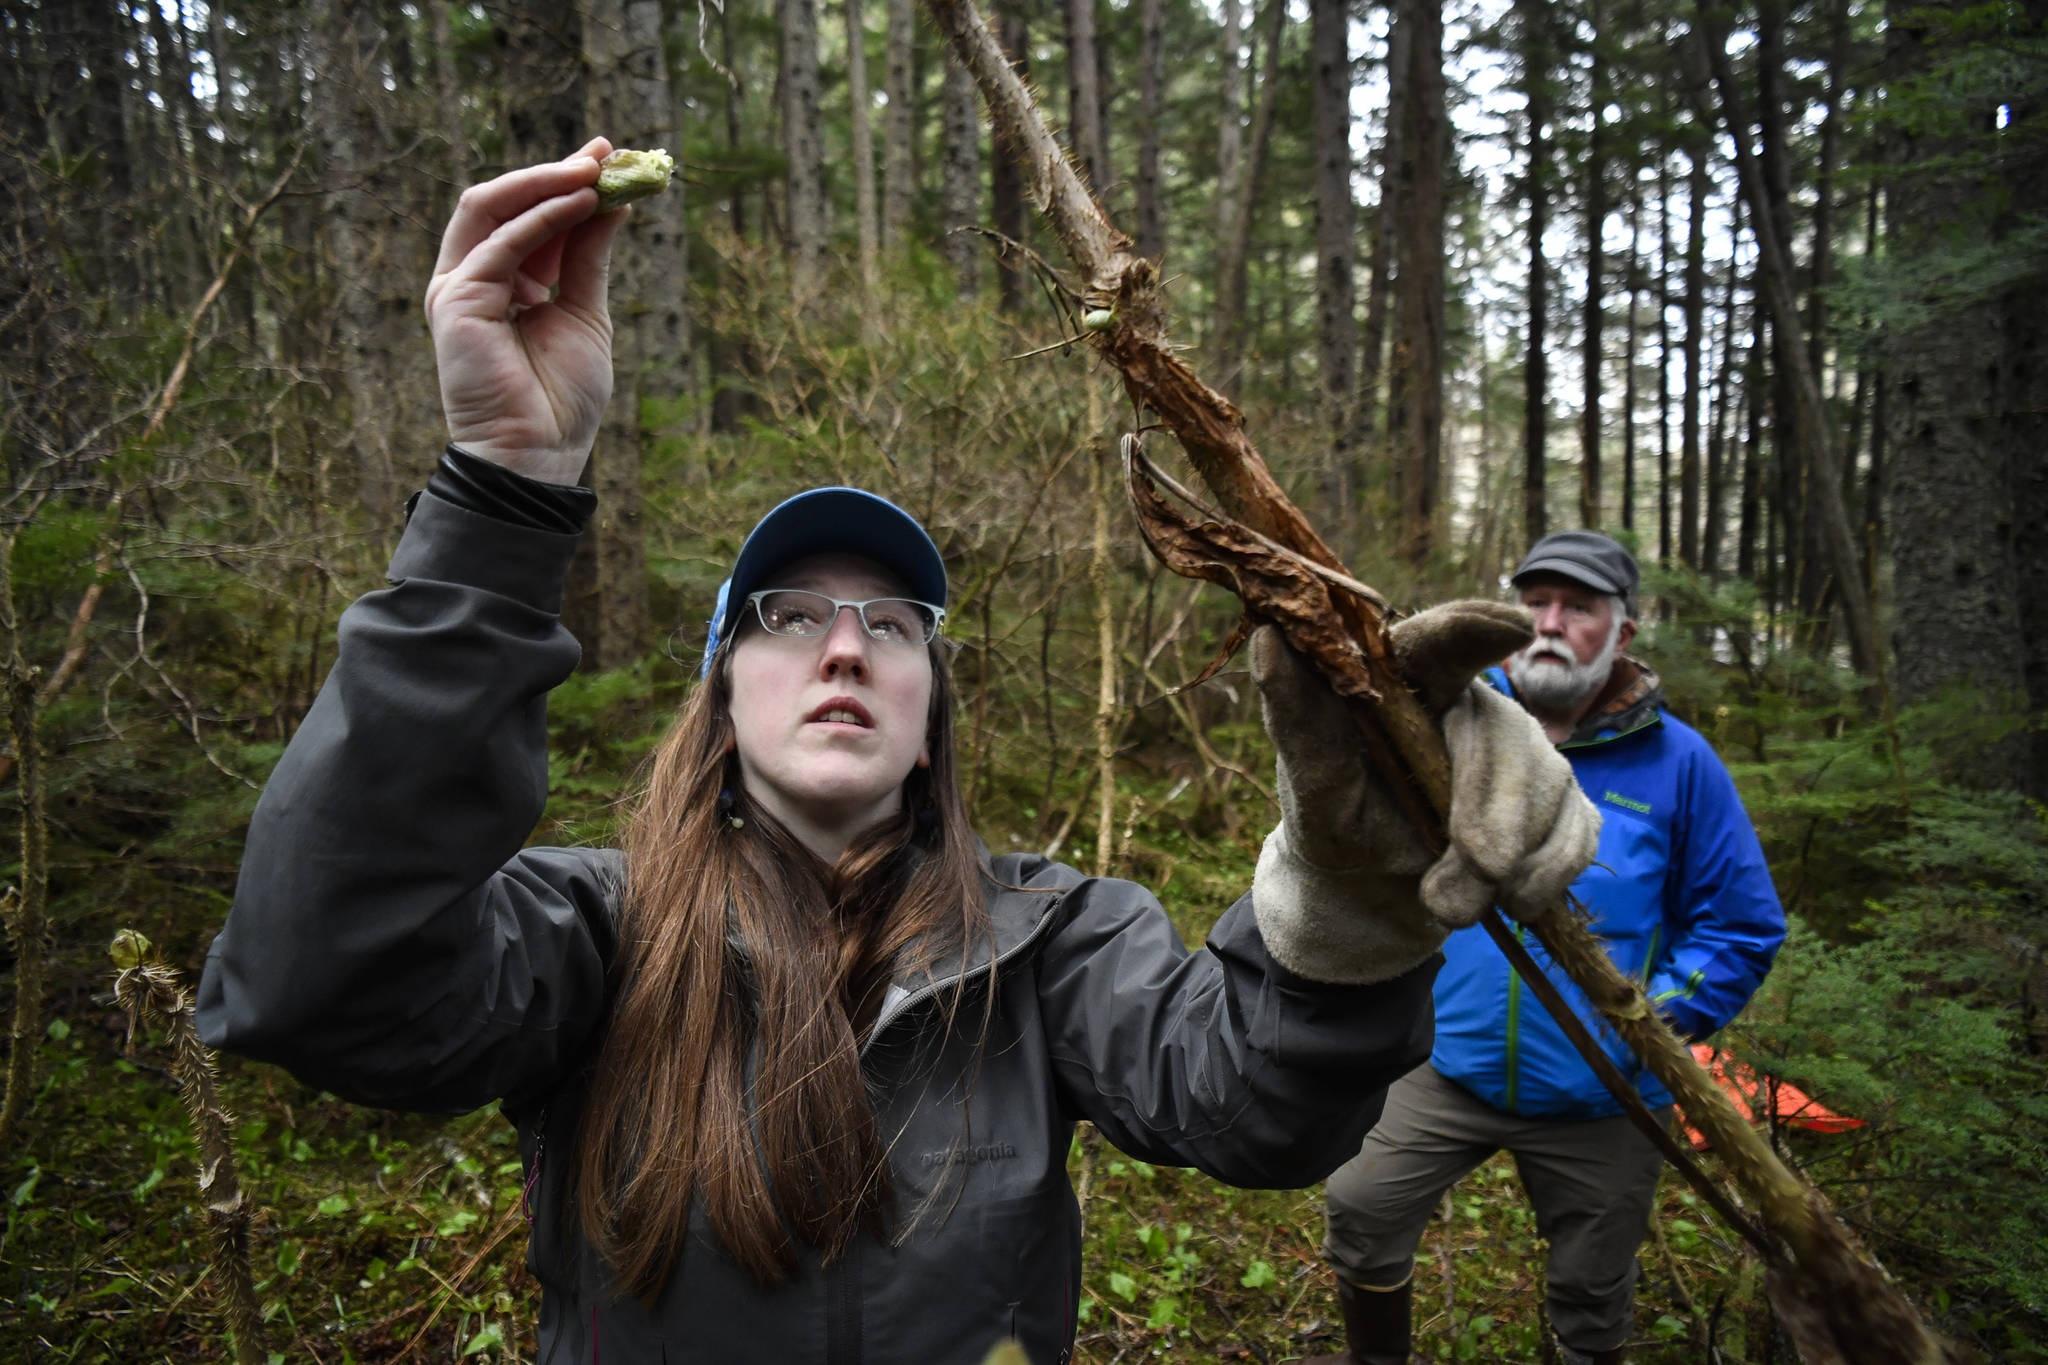 Erin Anais Heist picks devil’s club buds for her Eating Wild recipe while hiking with her father, Bill Hanson, in the Auke Recreation Area on Tuesday, April 23, 2019. (Michael Penn | Juneau Empire)